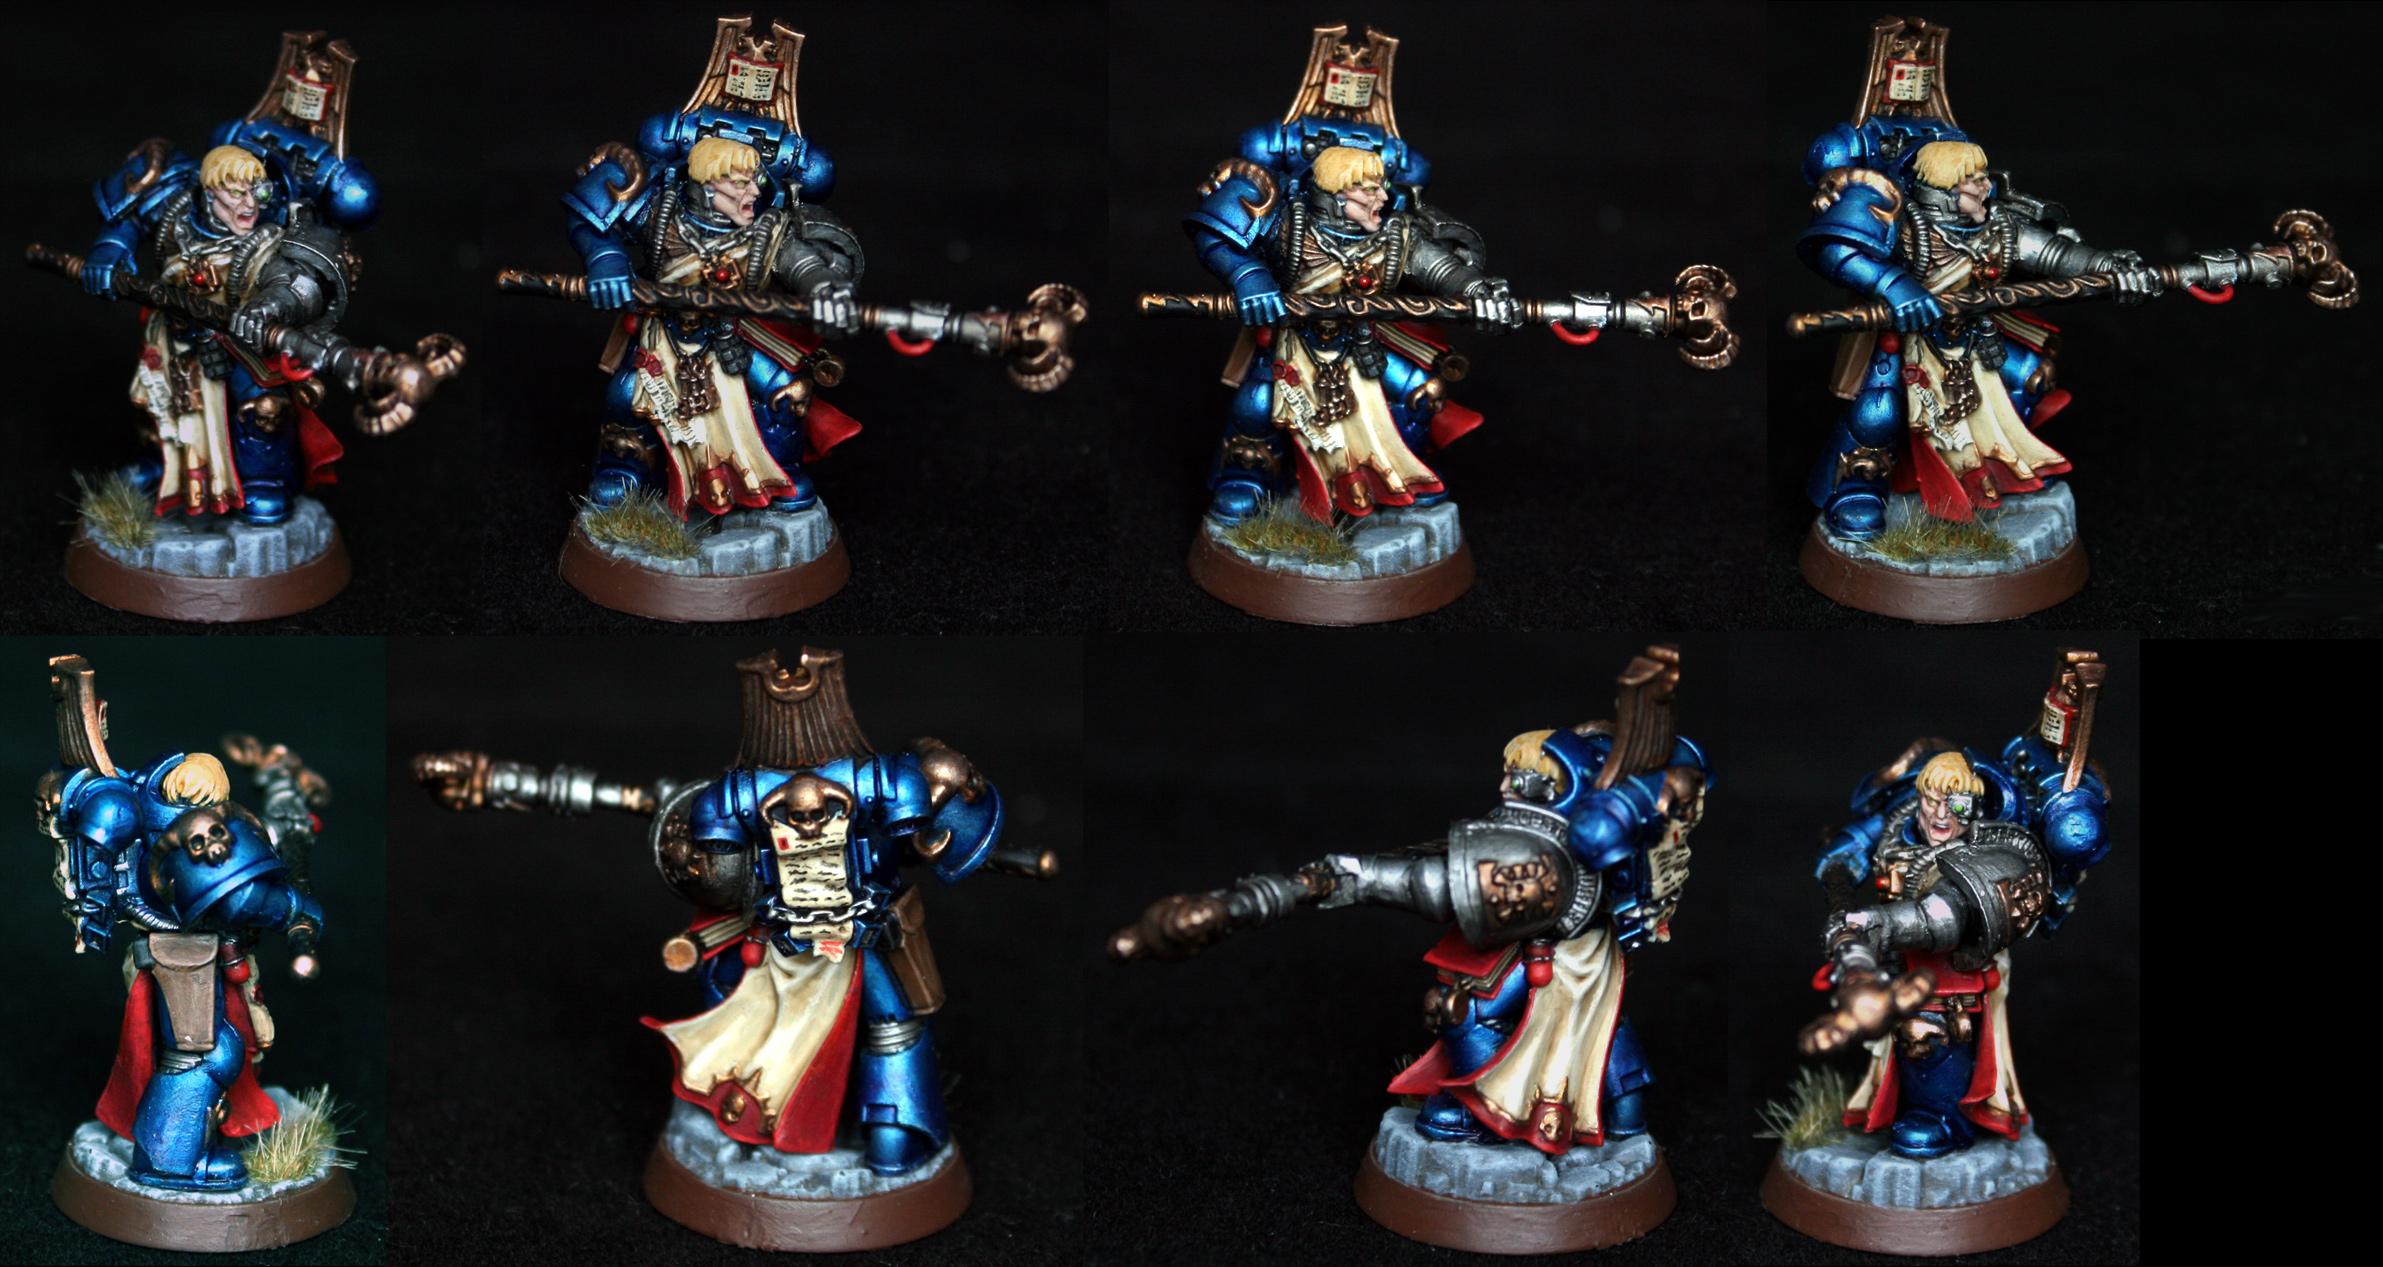 Arkaal, Blue, Death, Deathwatch, Librarian, Metallic, Space, Space Marines, Watch